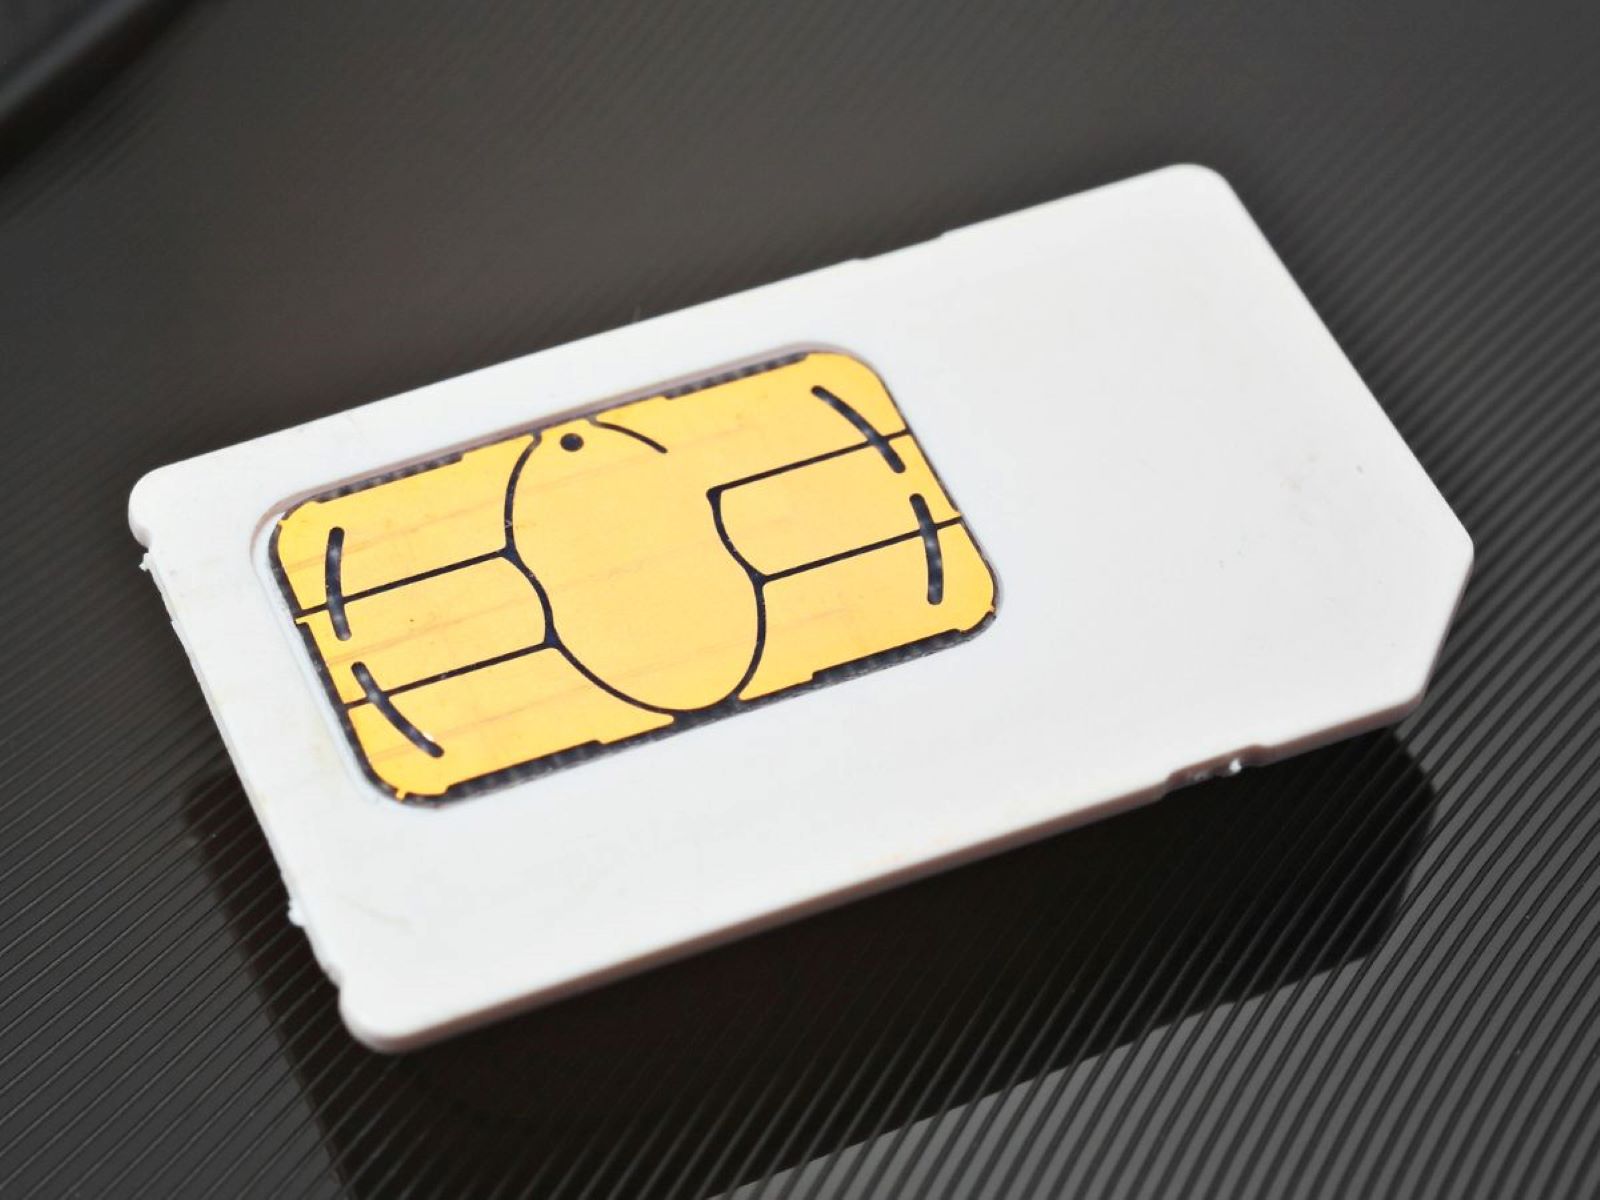 Activating Textnow SIM Card On IPhone: Step-by-Step